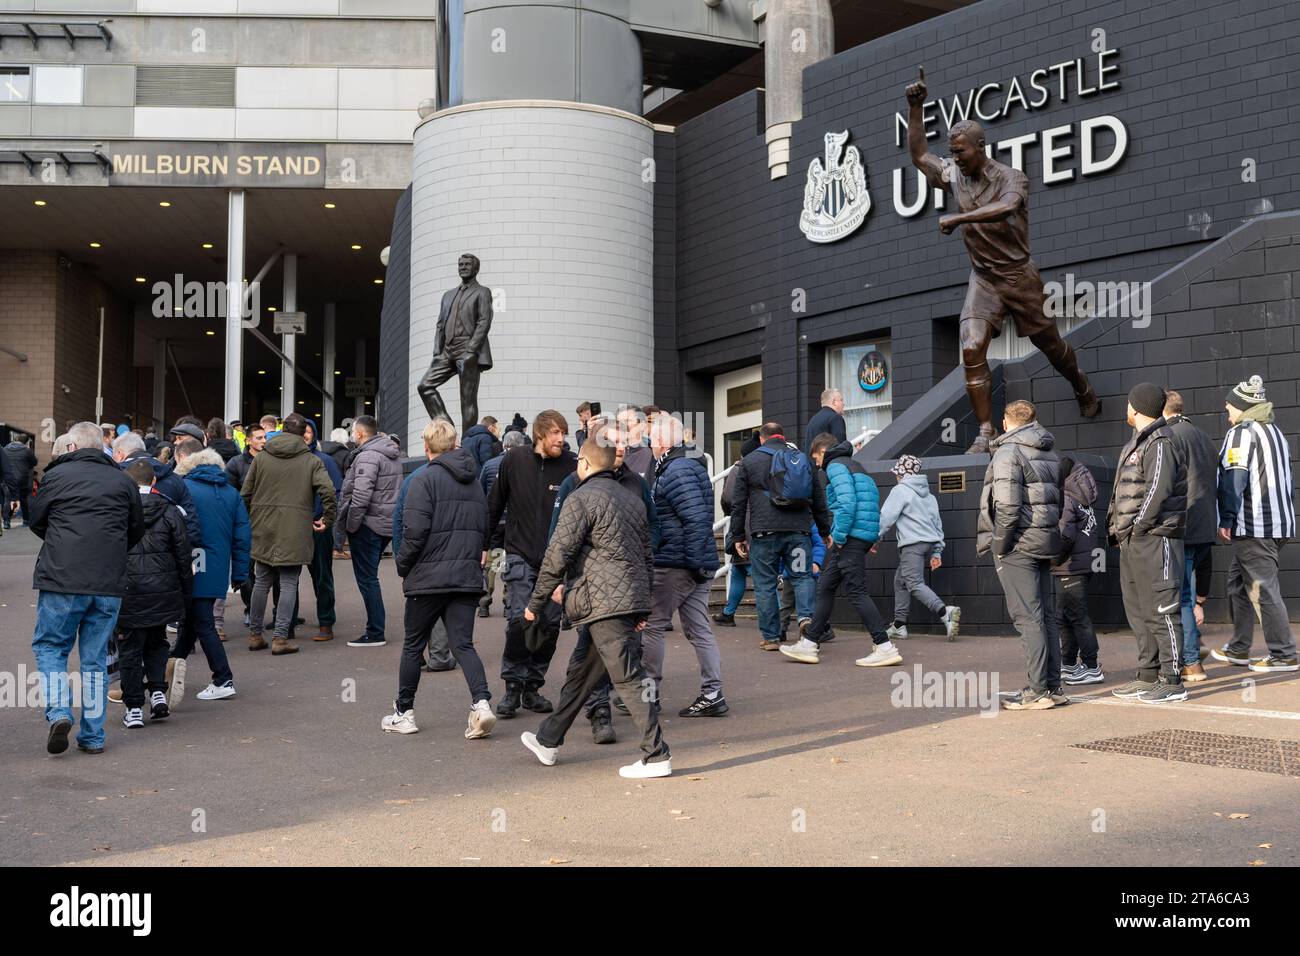 Fans arrive at St James' Park stadium, home ground of Newcastle United Football Club, in Newcastle upon Tyne, UK Stock Photo